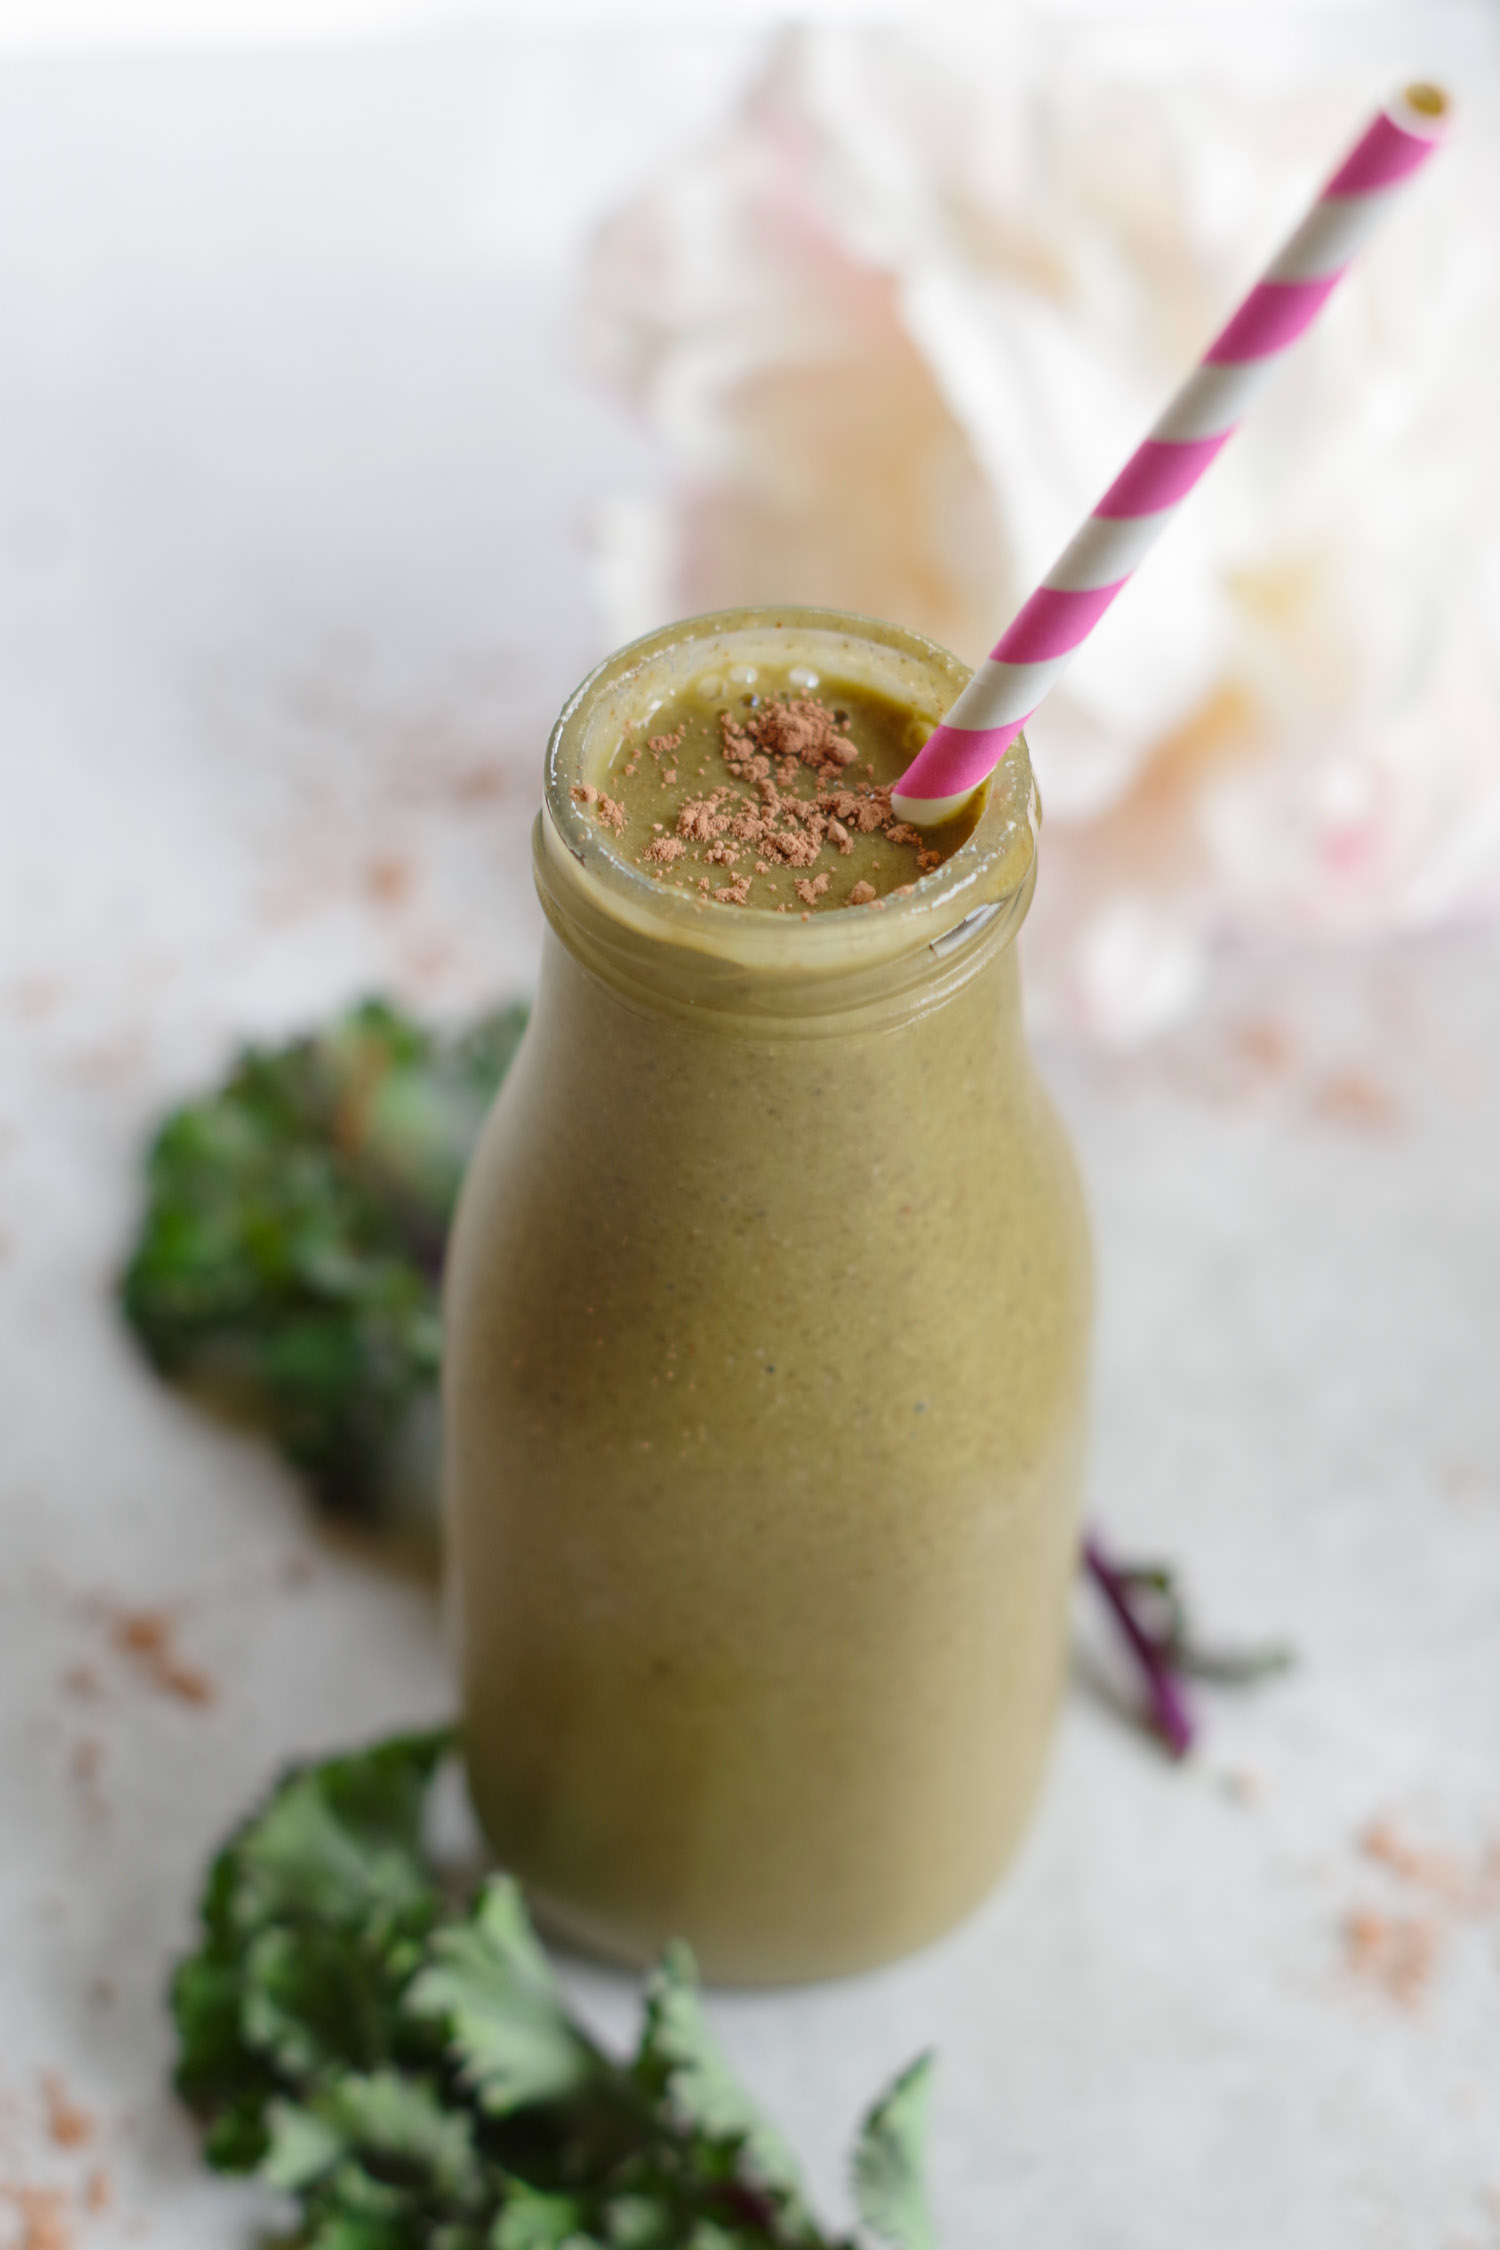 Chocolate Almond Kale SMoothie, by Beautiful Ingredient